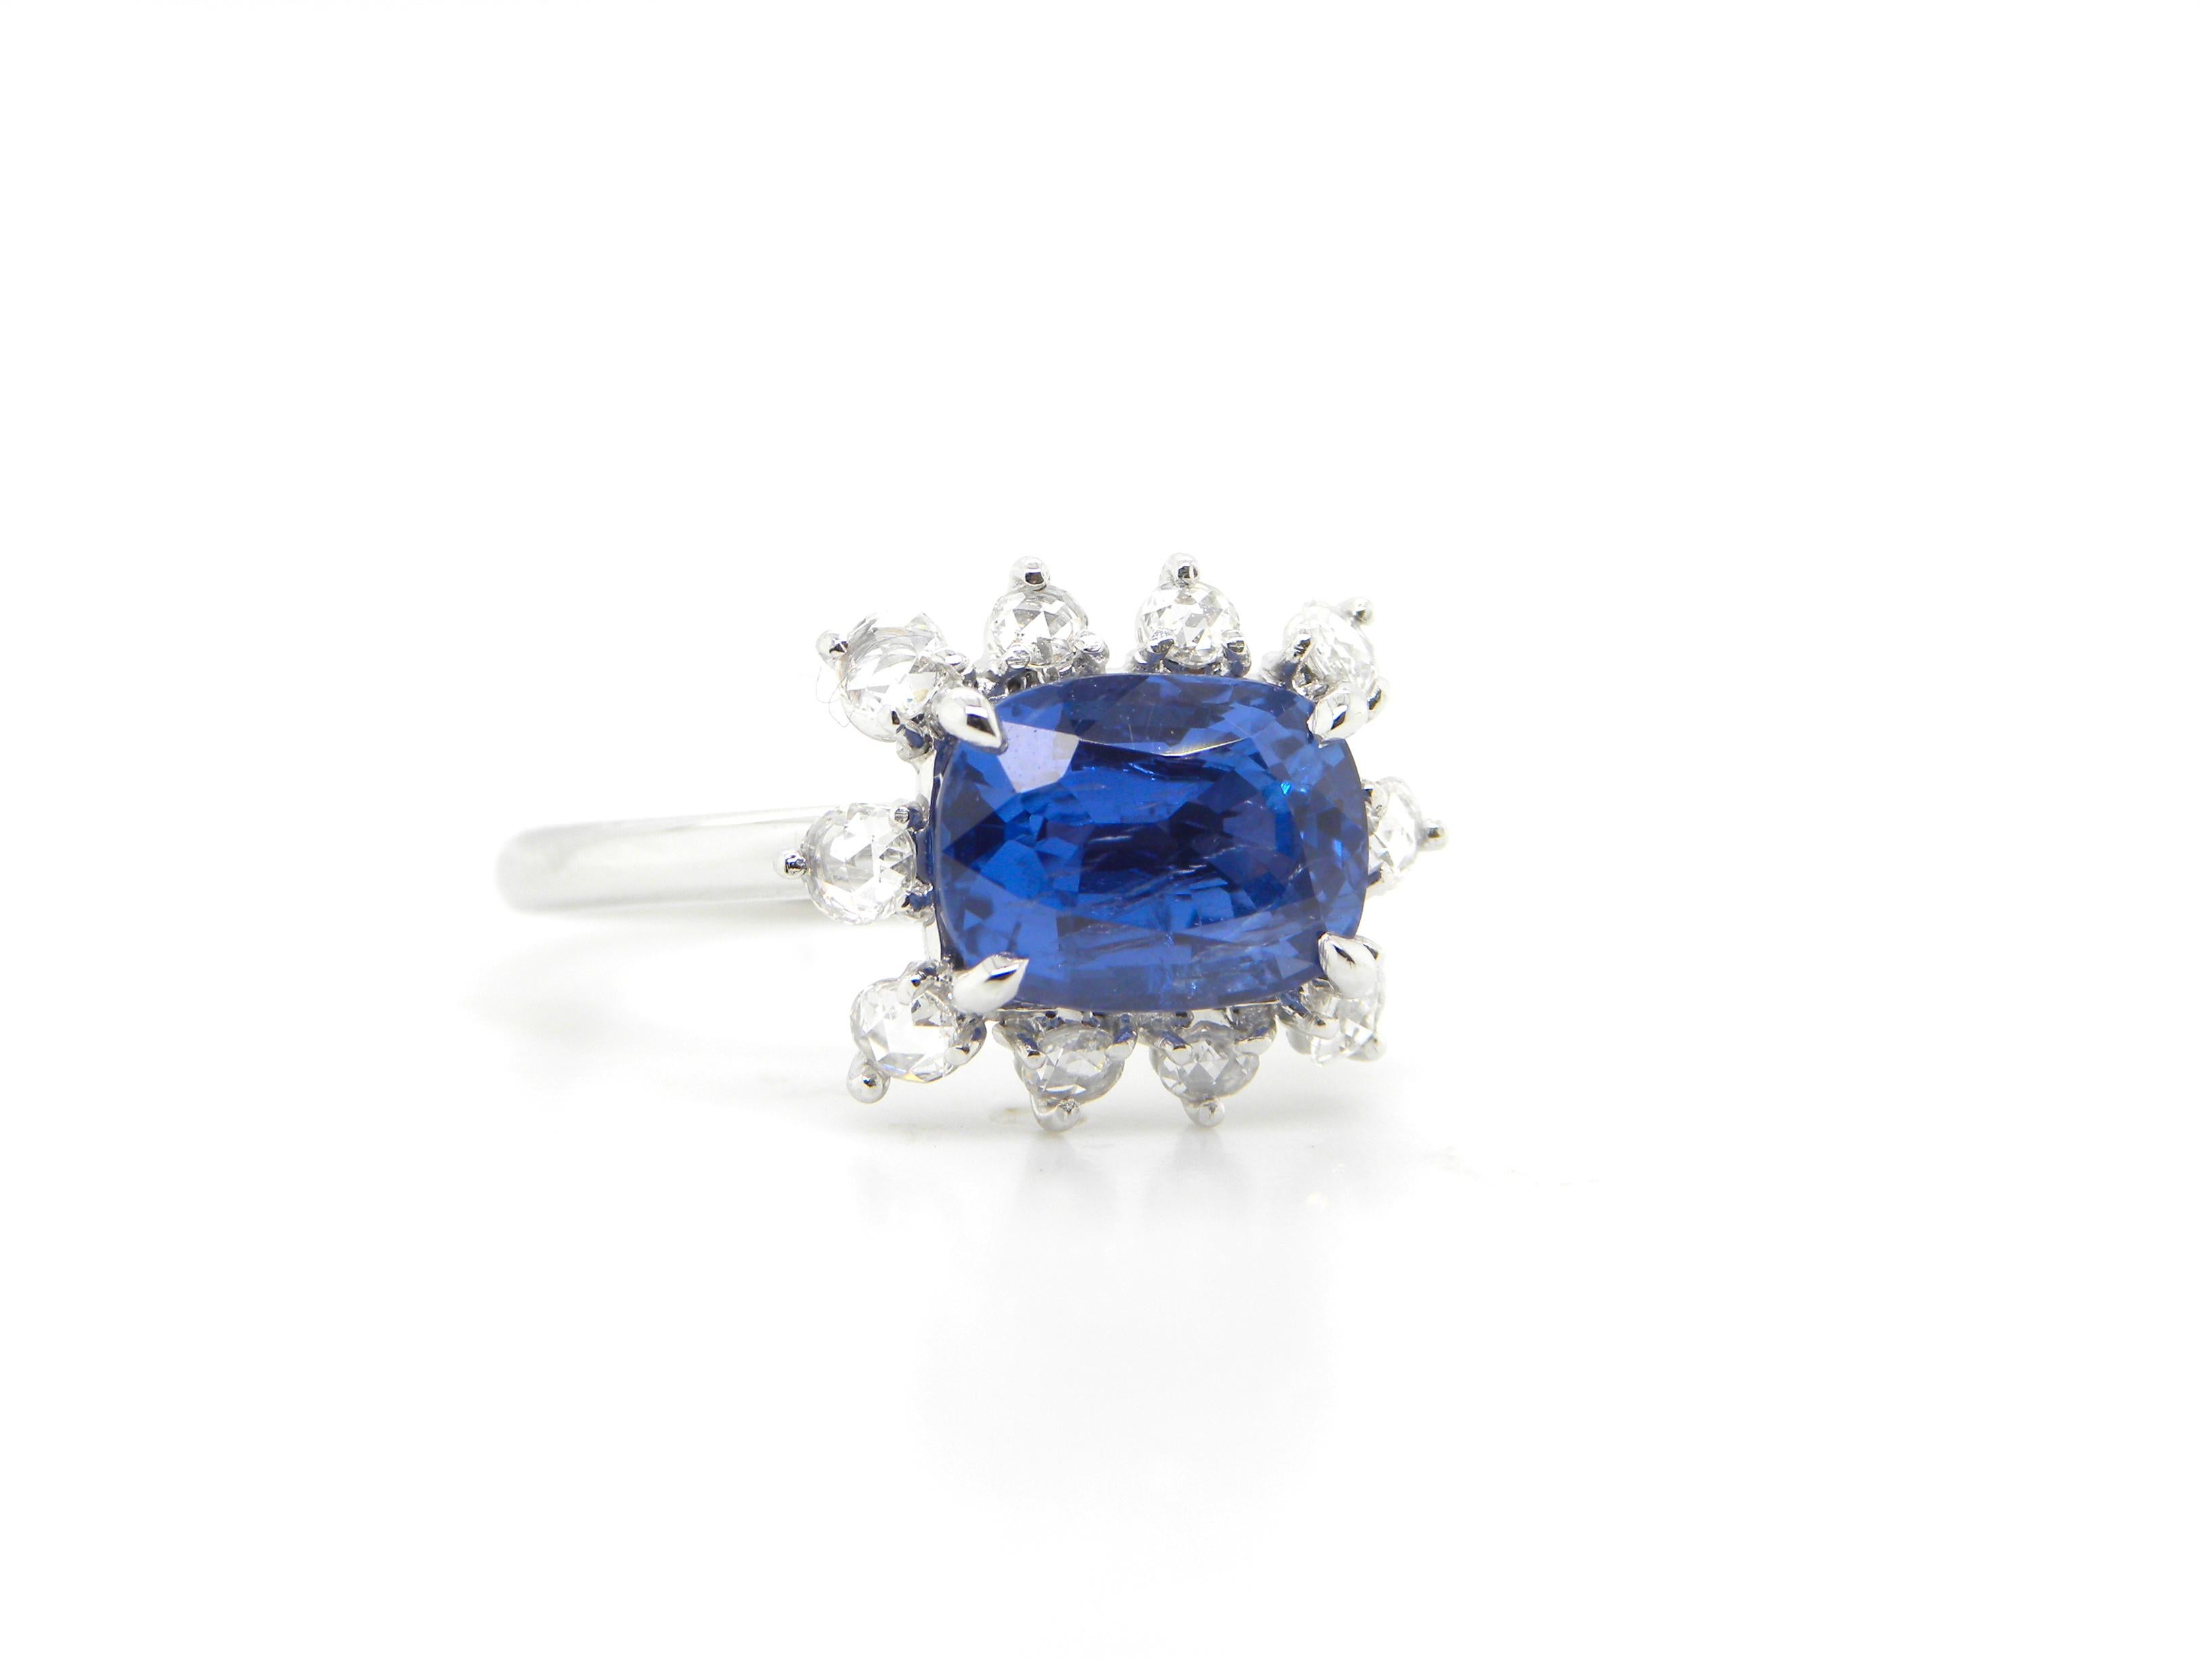 Contemporary 2.67 Carat GIA Certified Unheated Burmese Sapphire and Diamond Engagement Ring